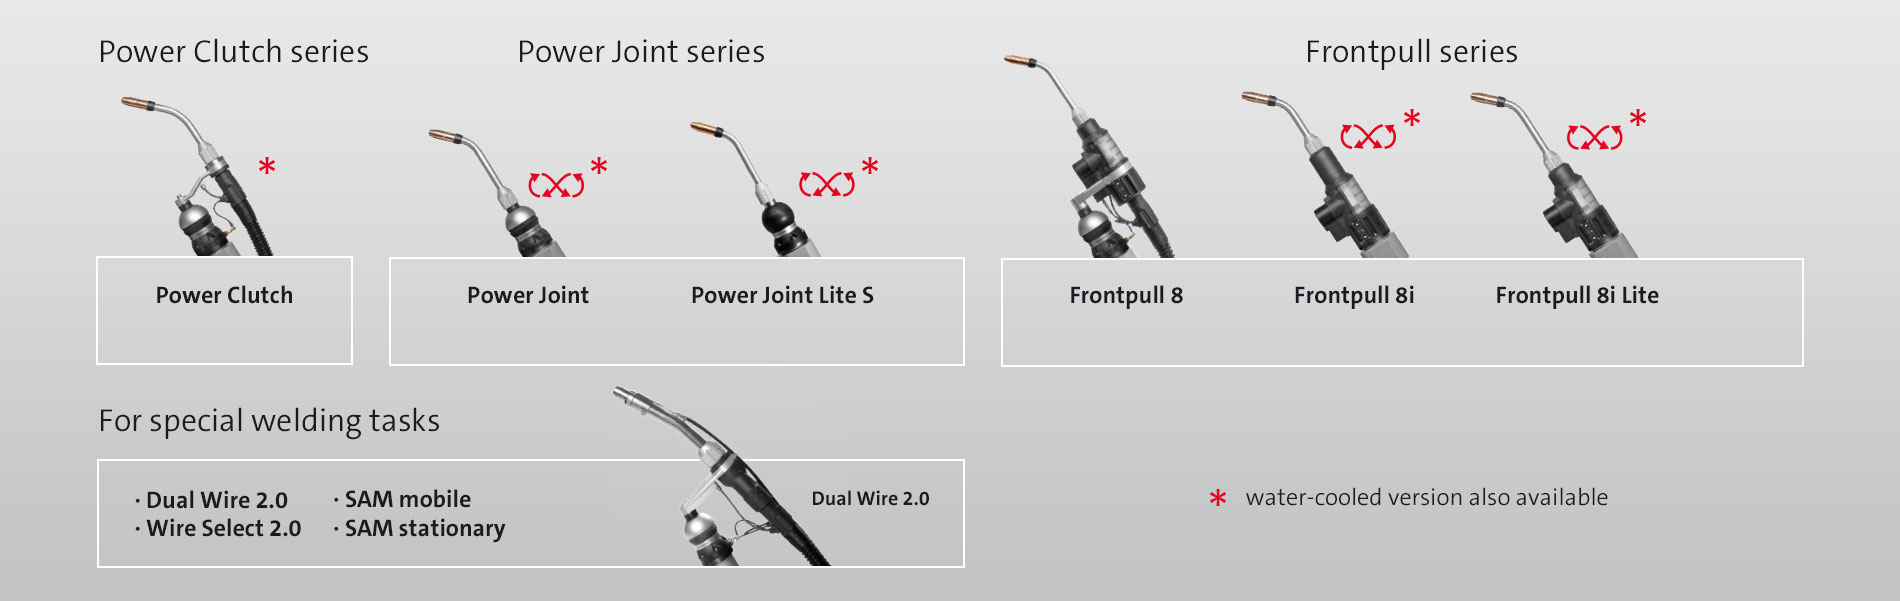 SKS Welding Systems torch series